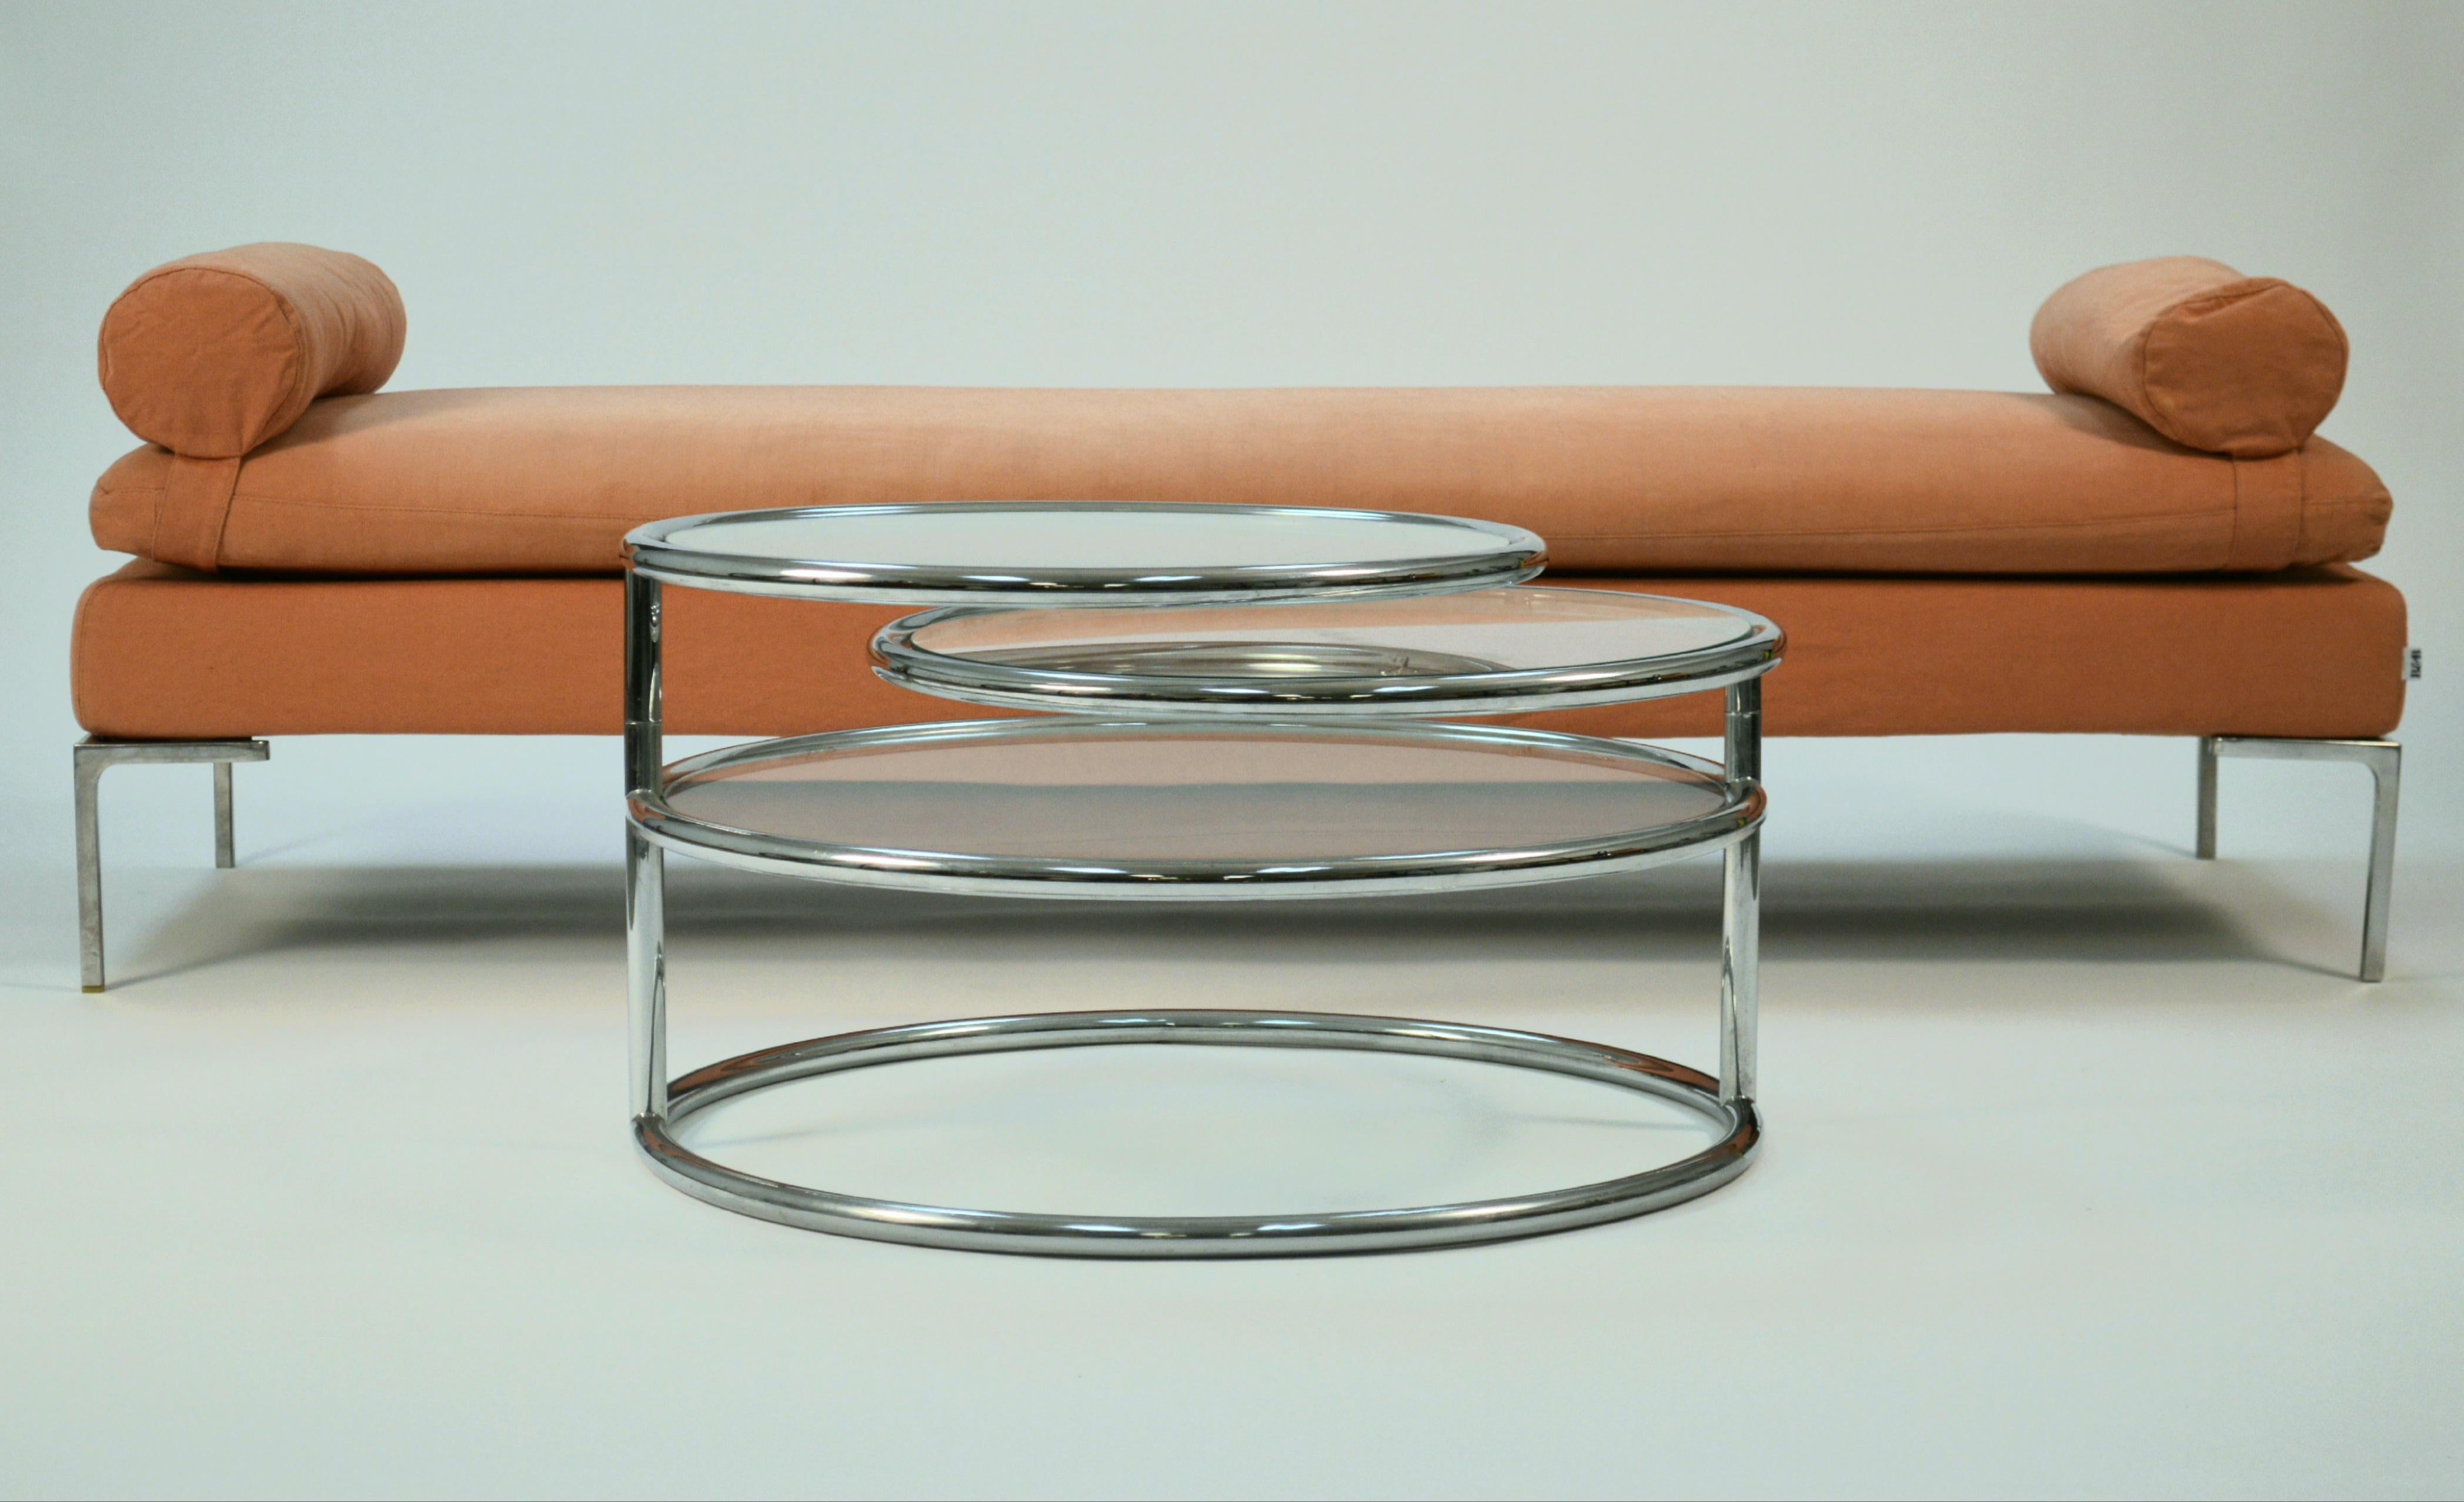 Three Tier Glass and Tubular Chrome Articulating Cocktail Table c. 1970's For Sale 2